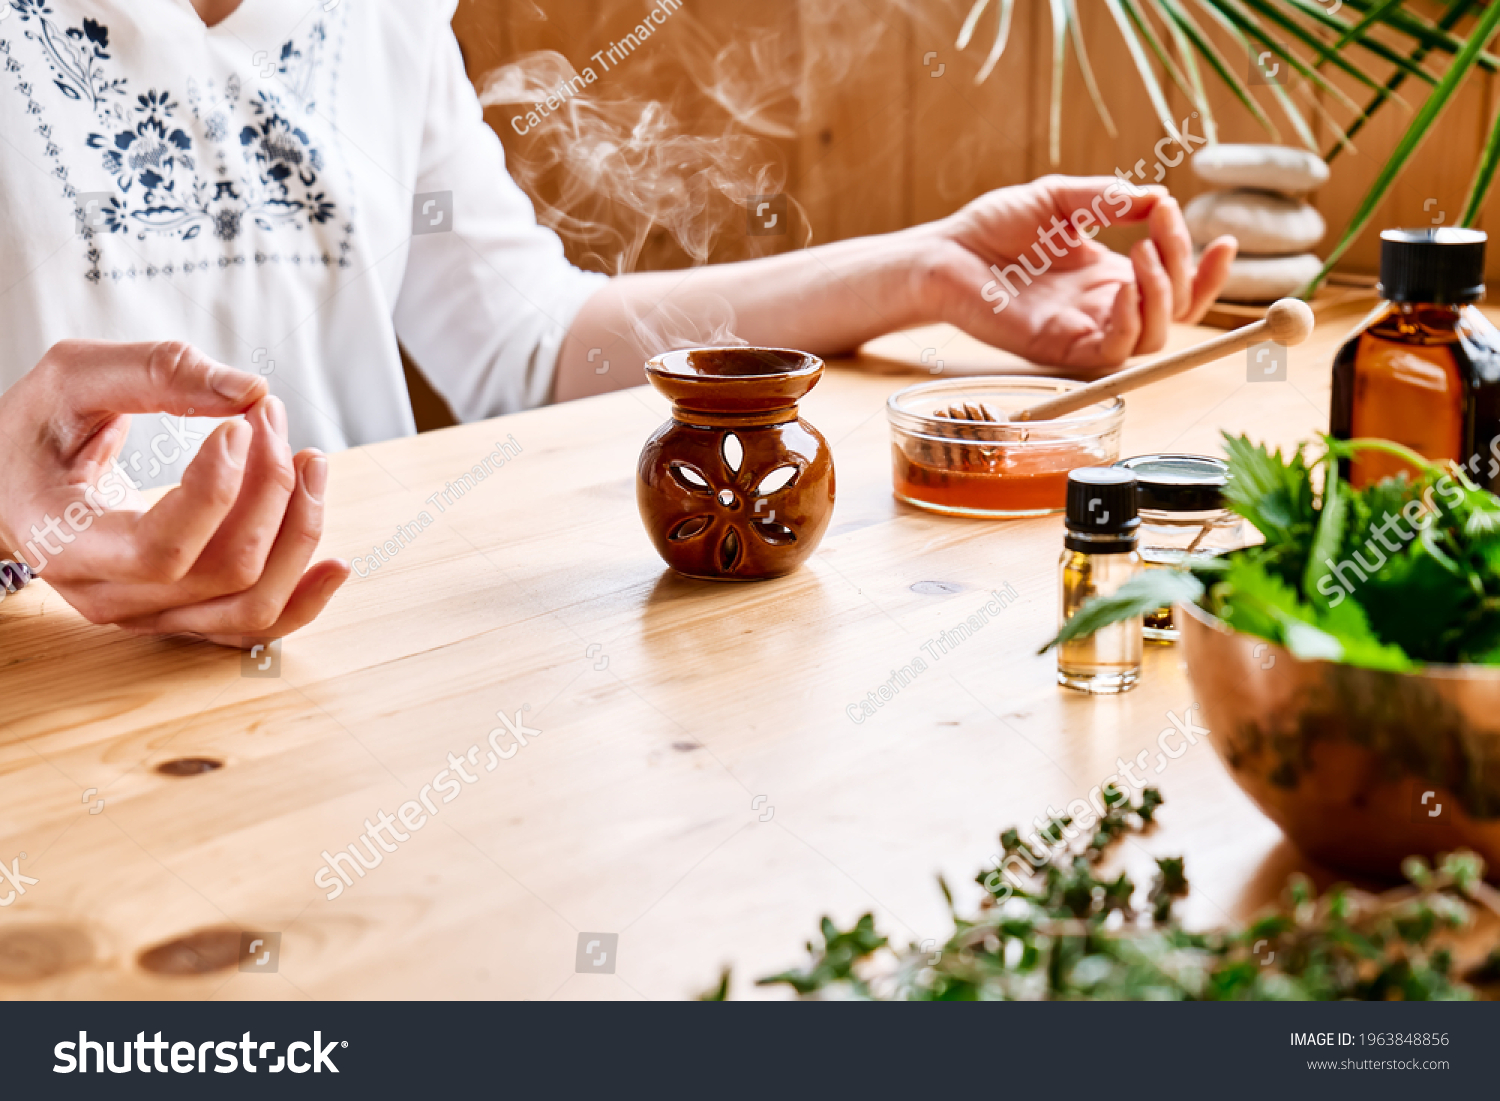 Woman has aromatherapy session at the table with essential oil diffuser medical herbs, different types of oils and essences. Aromatherapy and alternative medicine concept. Natural remedies. #1963848856